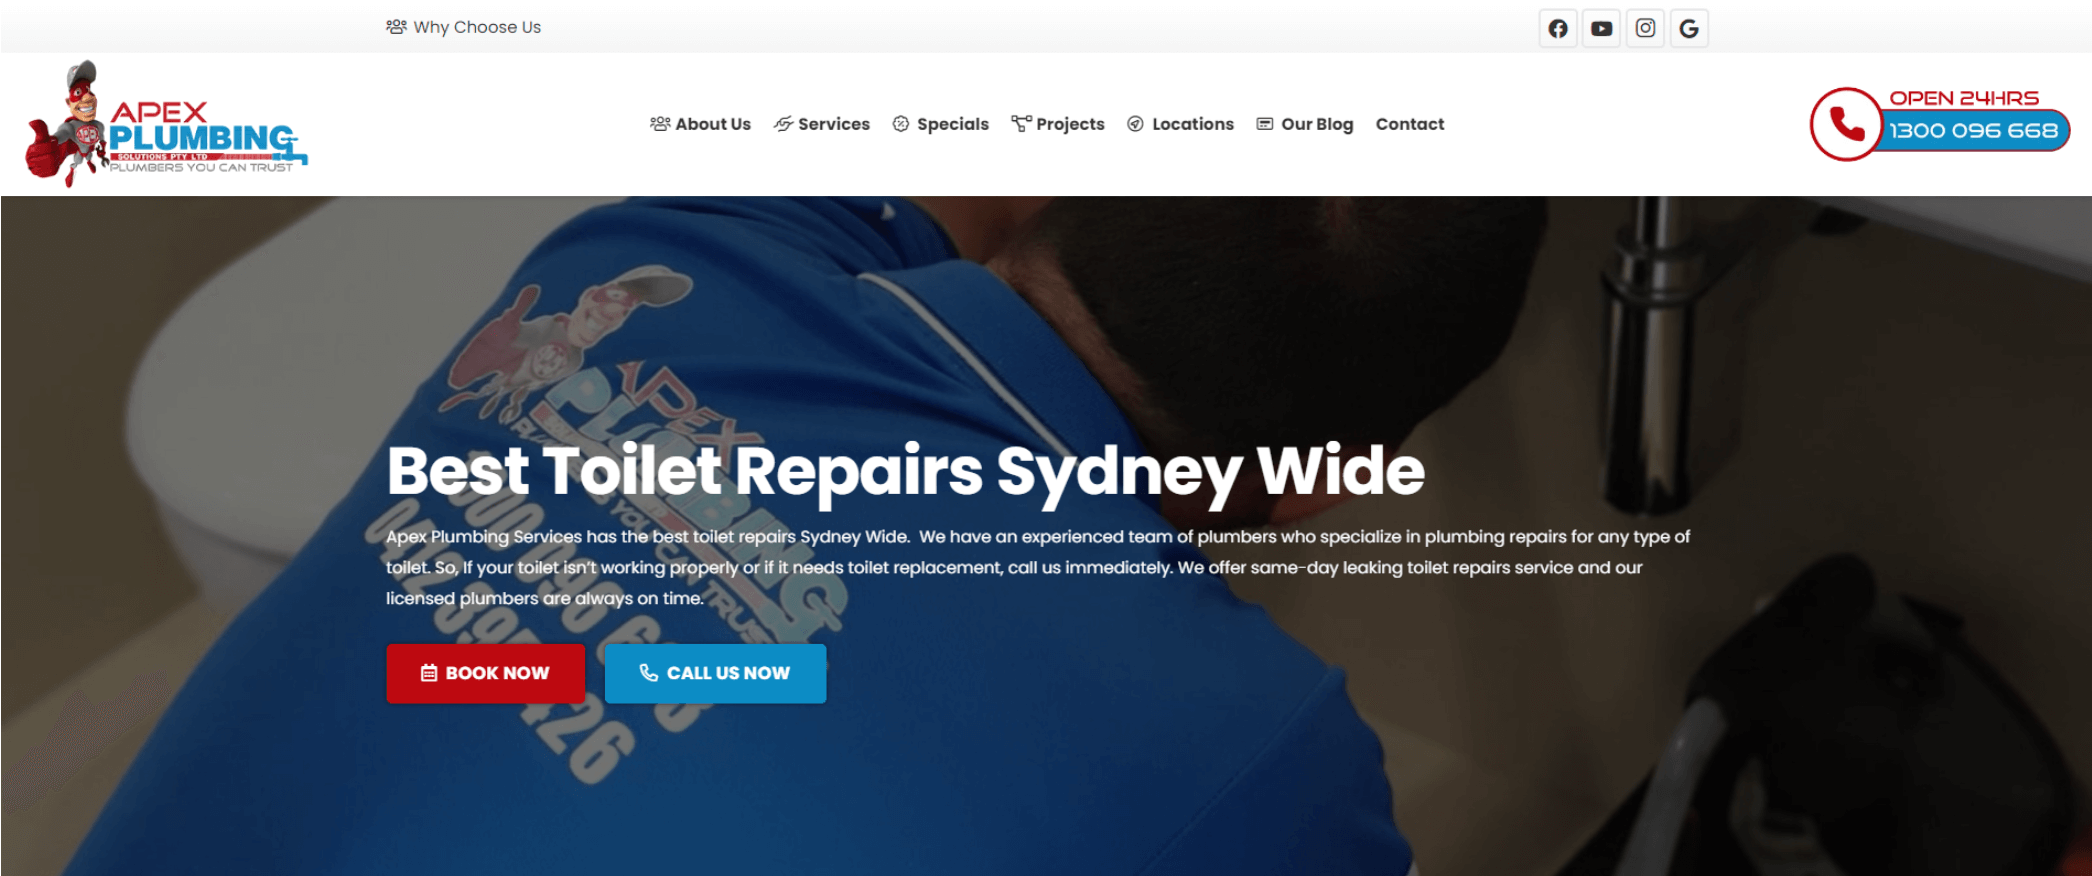 apex-plumbing-services-nifty-marketing-case-study